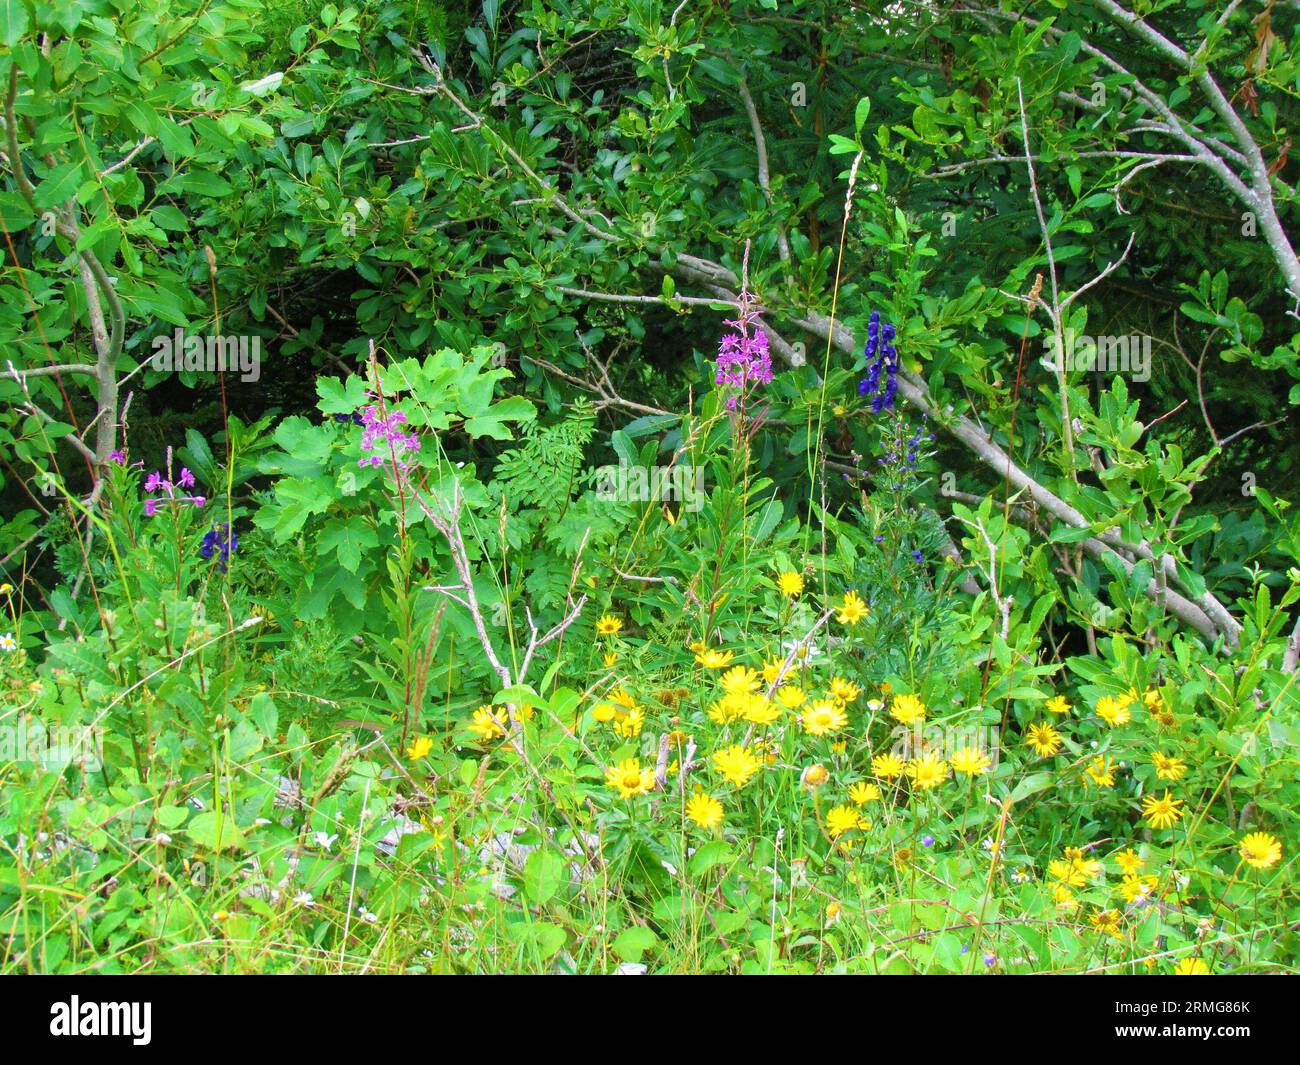 Colorful wild garden growing with yellow blooming hawkbit (Leontodon pyrenaicus), blue wolfsbane or monk's-hood (Aconitum napellus) and pink fireweed Stock Photo